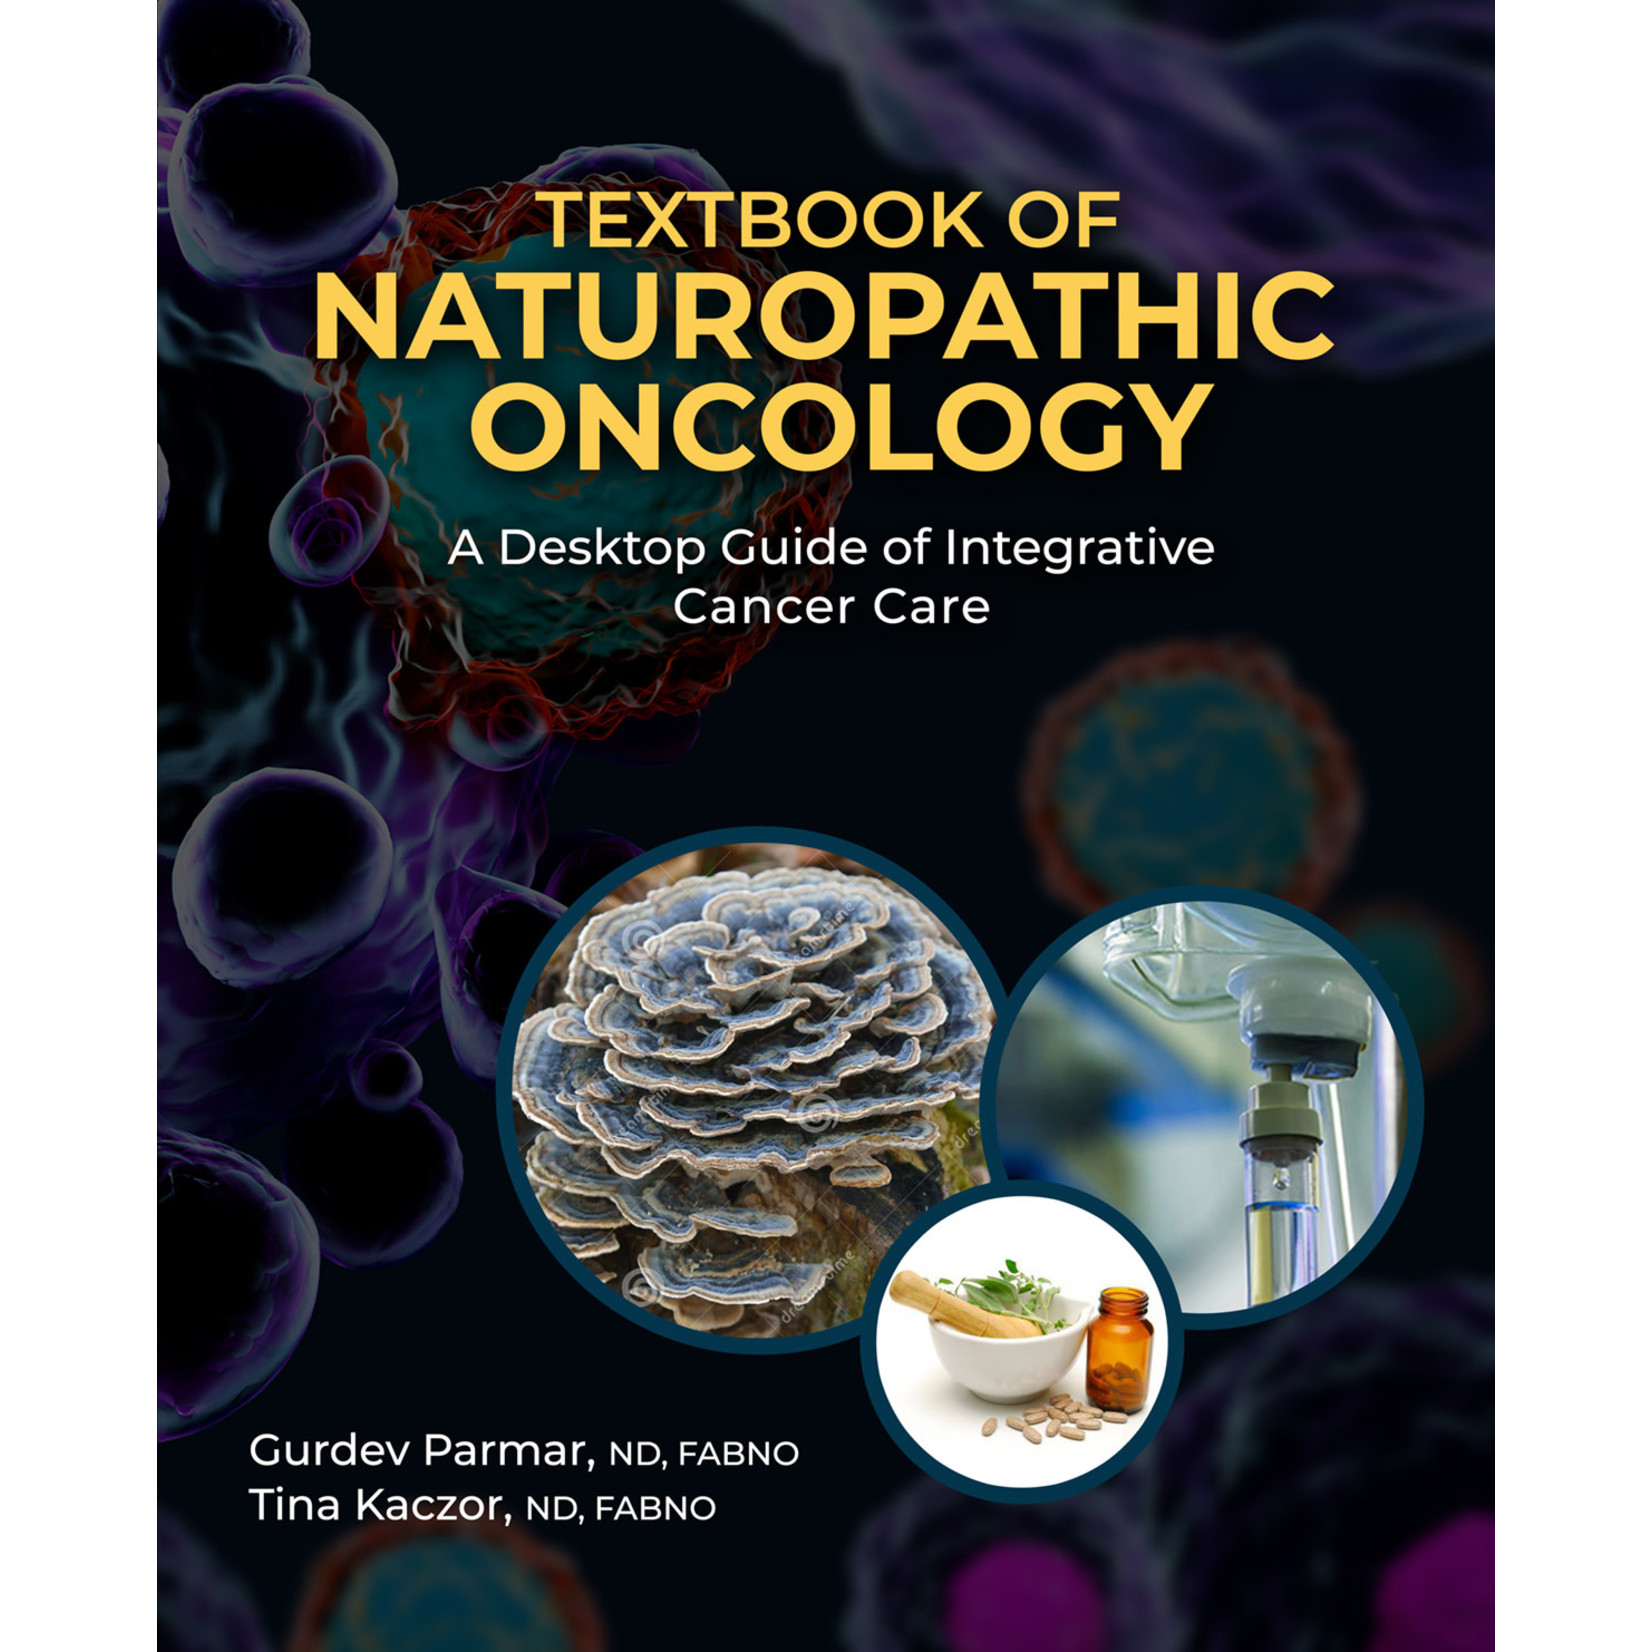 MEDICATRIX HOLDINGS TEXTBOOK OF NATUROPATHIC ONCOLOGY  (G. PARMAR ET AL.)